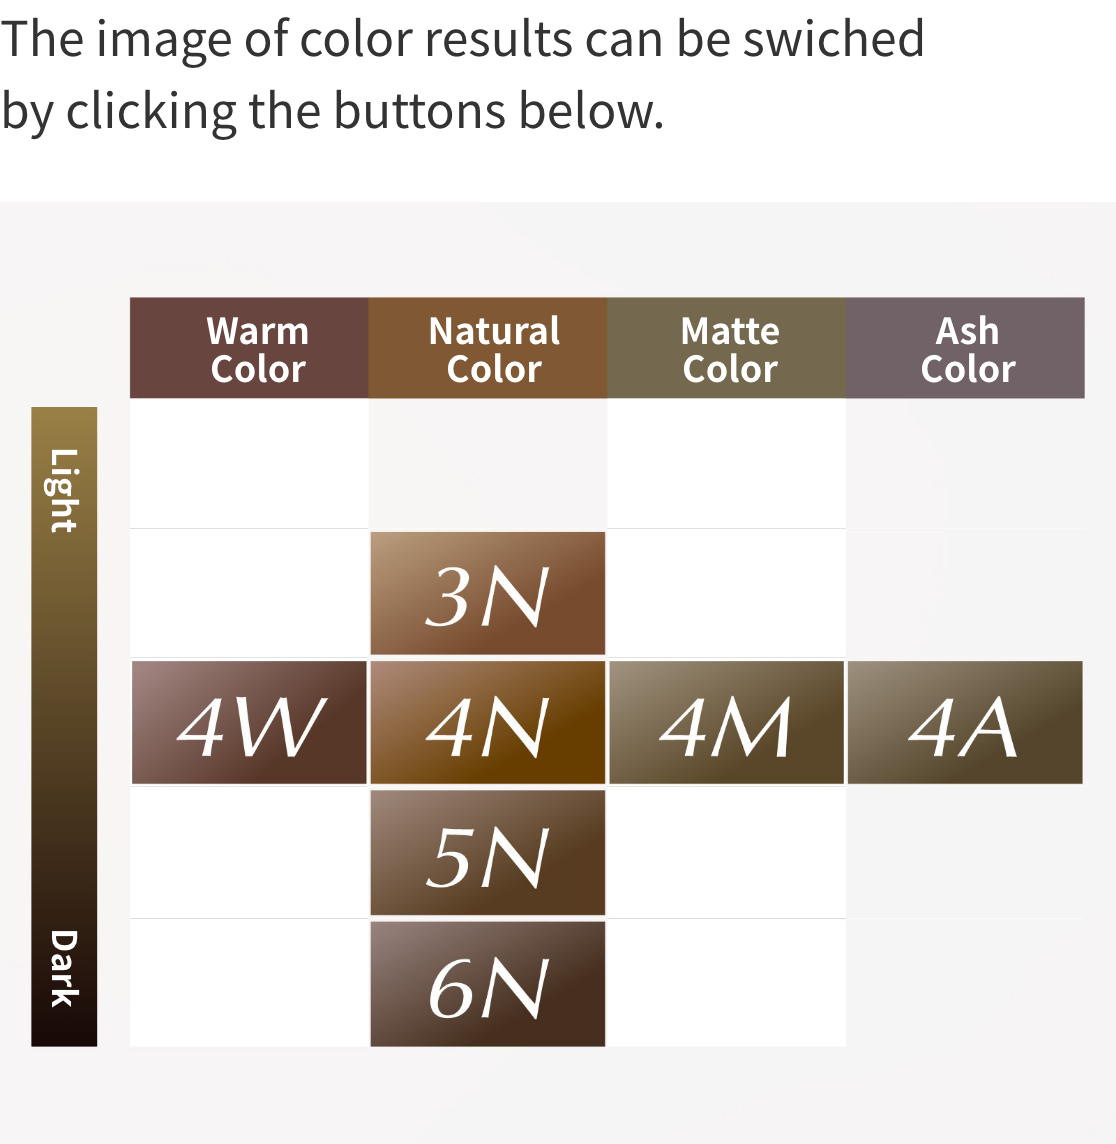 The image of color results can be switched by clicking the buttons below.